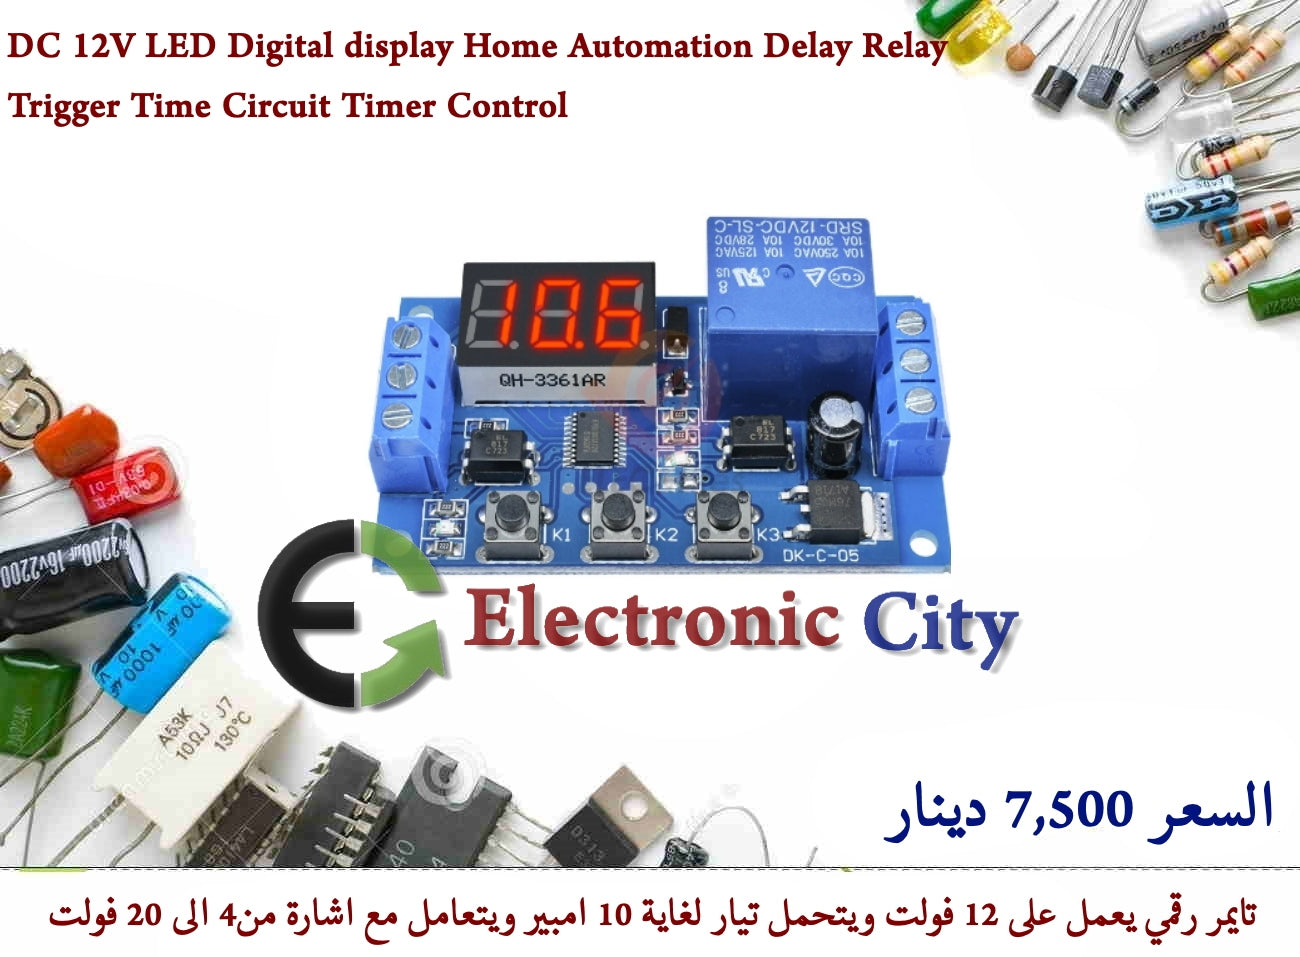 DC 12V LED Digital display Home Automation Delay Relay Trigger Time Circuit Timer Control